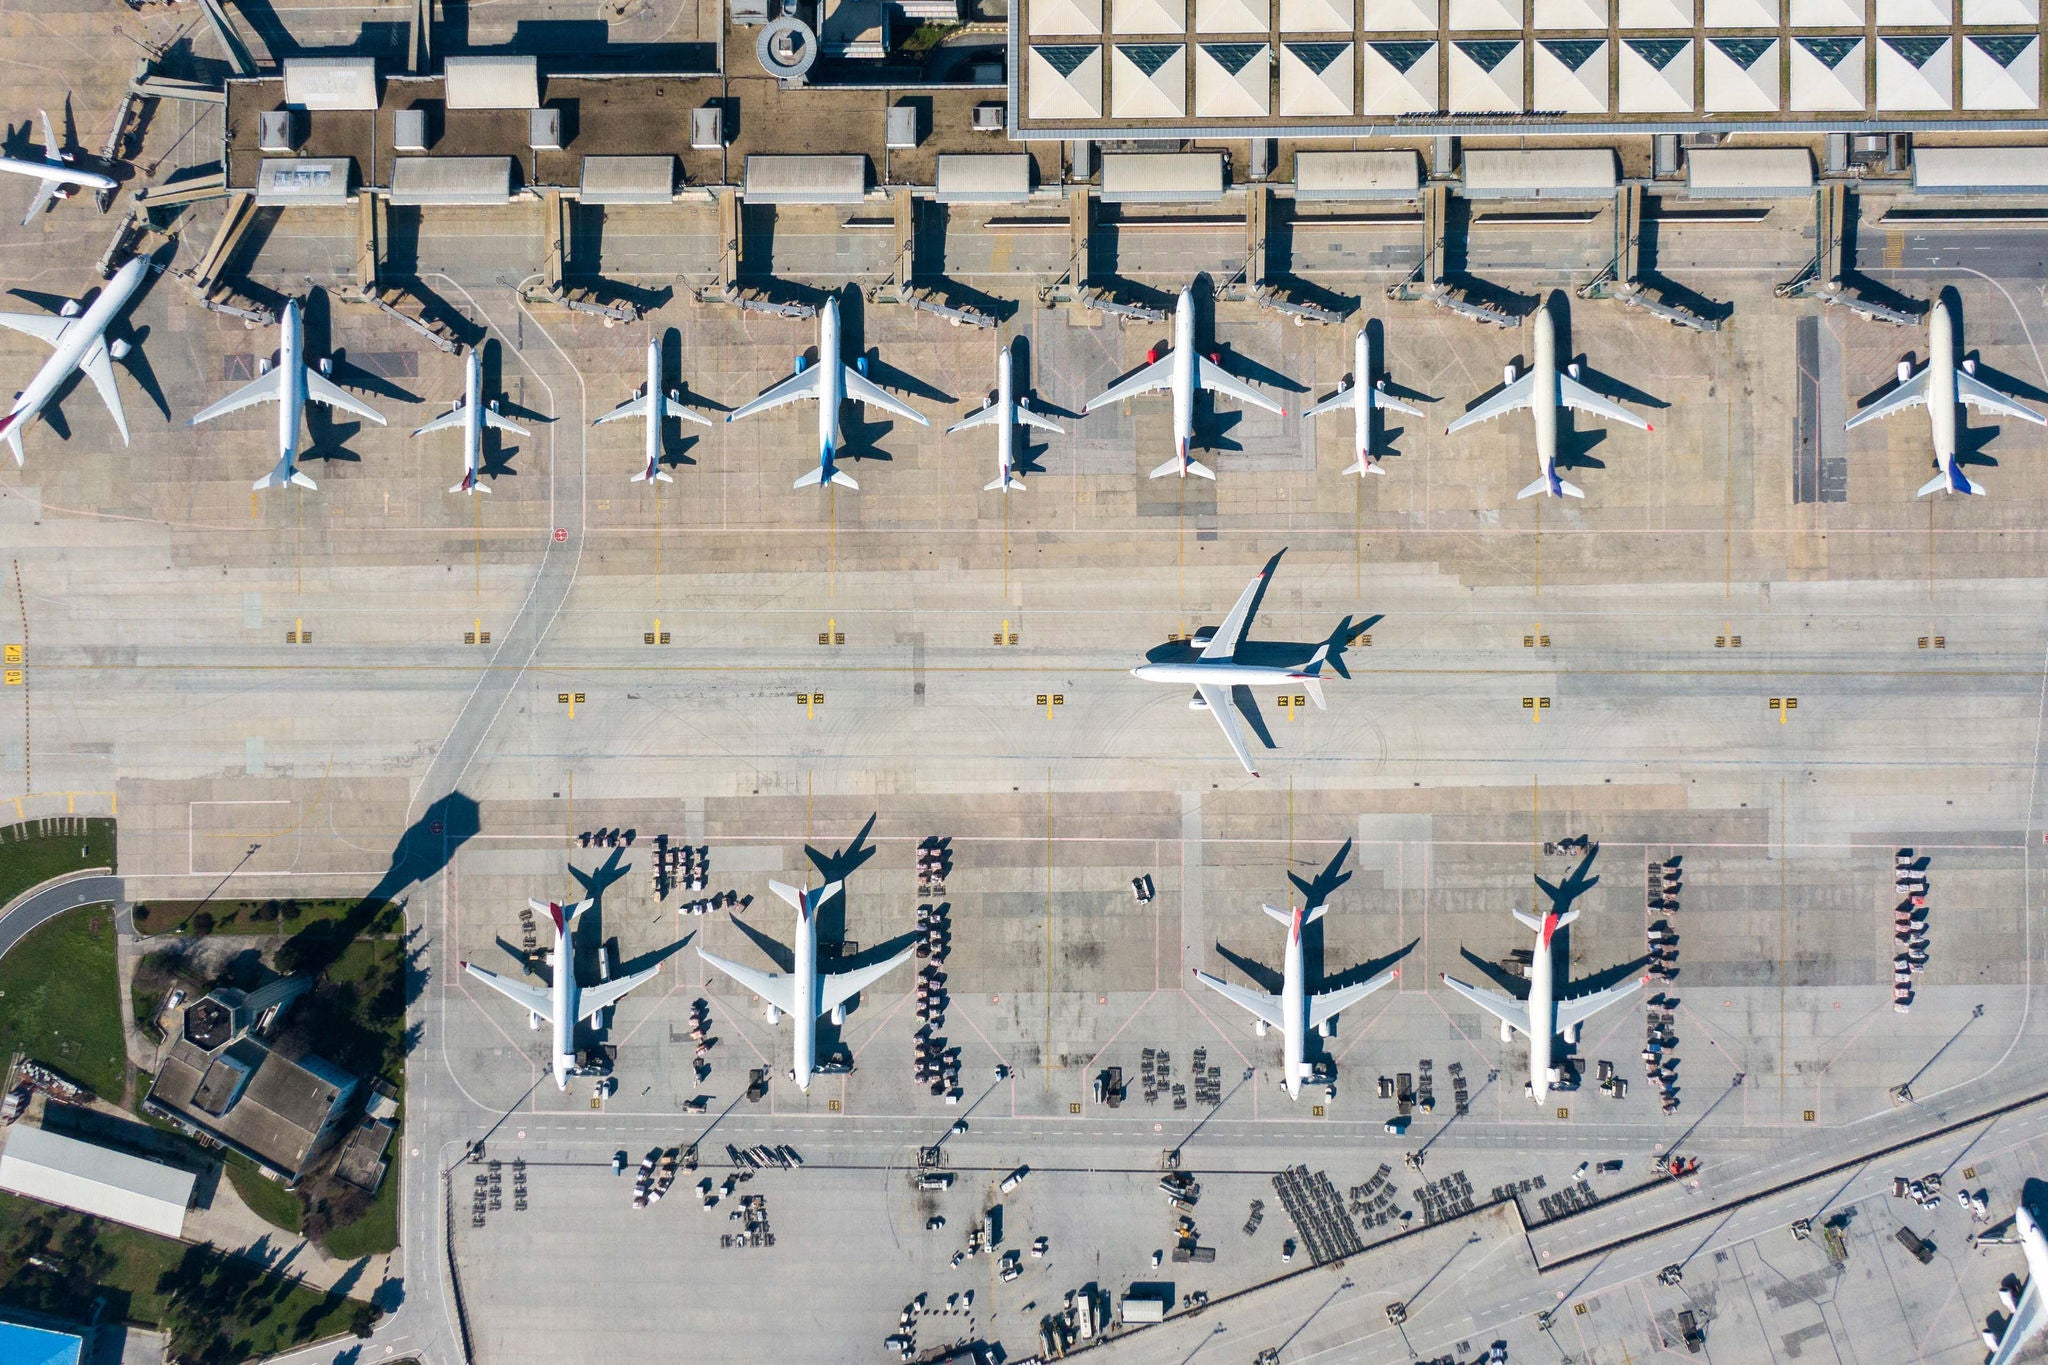 Airport, Airplane, Airport Runway, Commercial Airplane